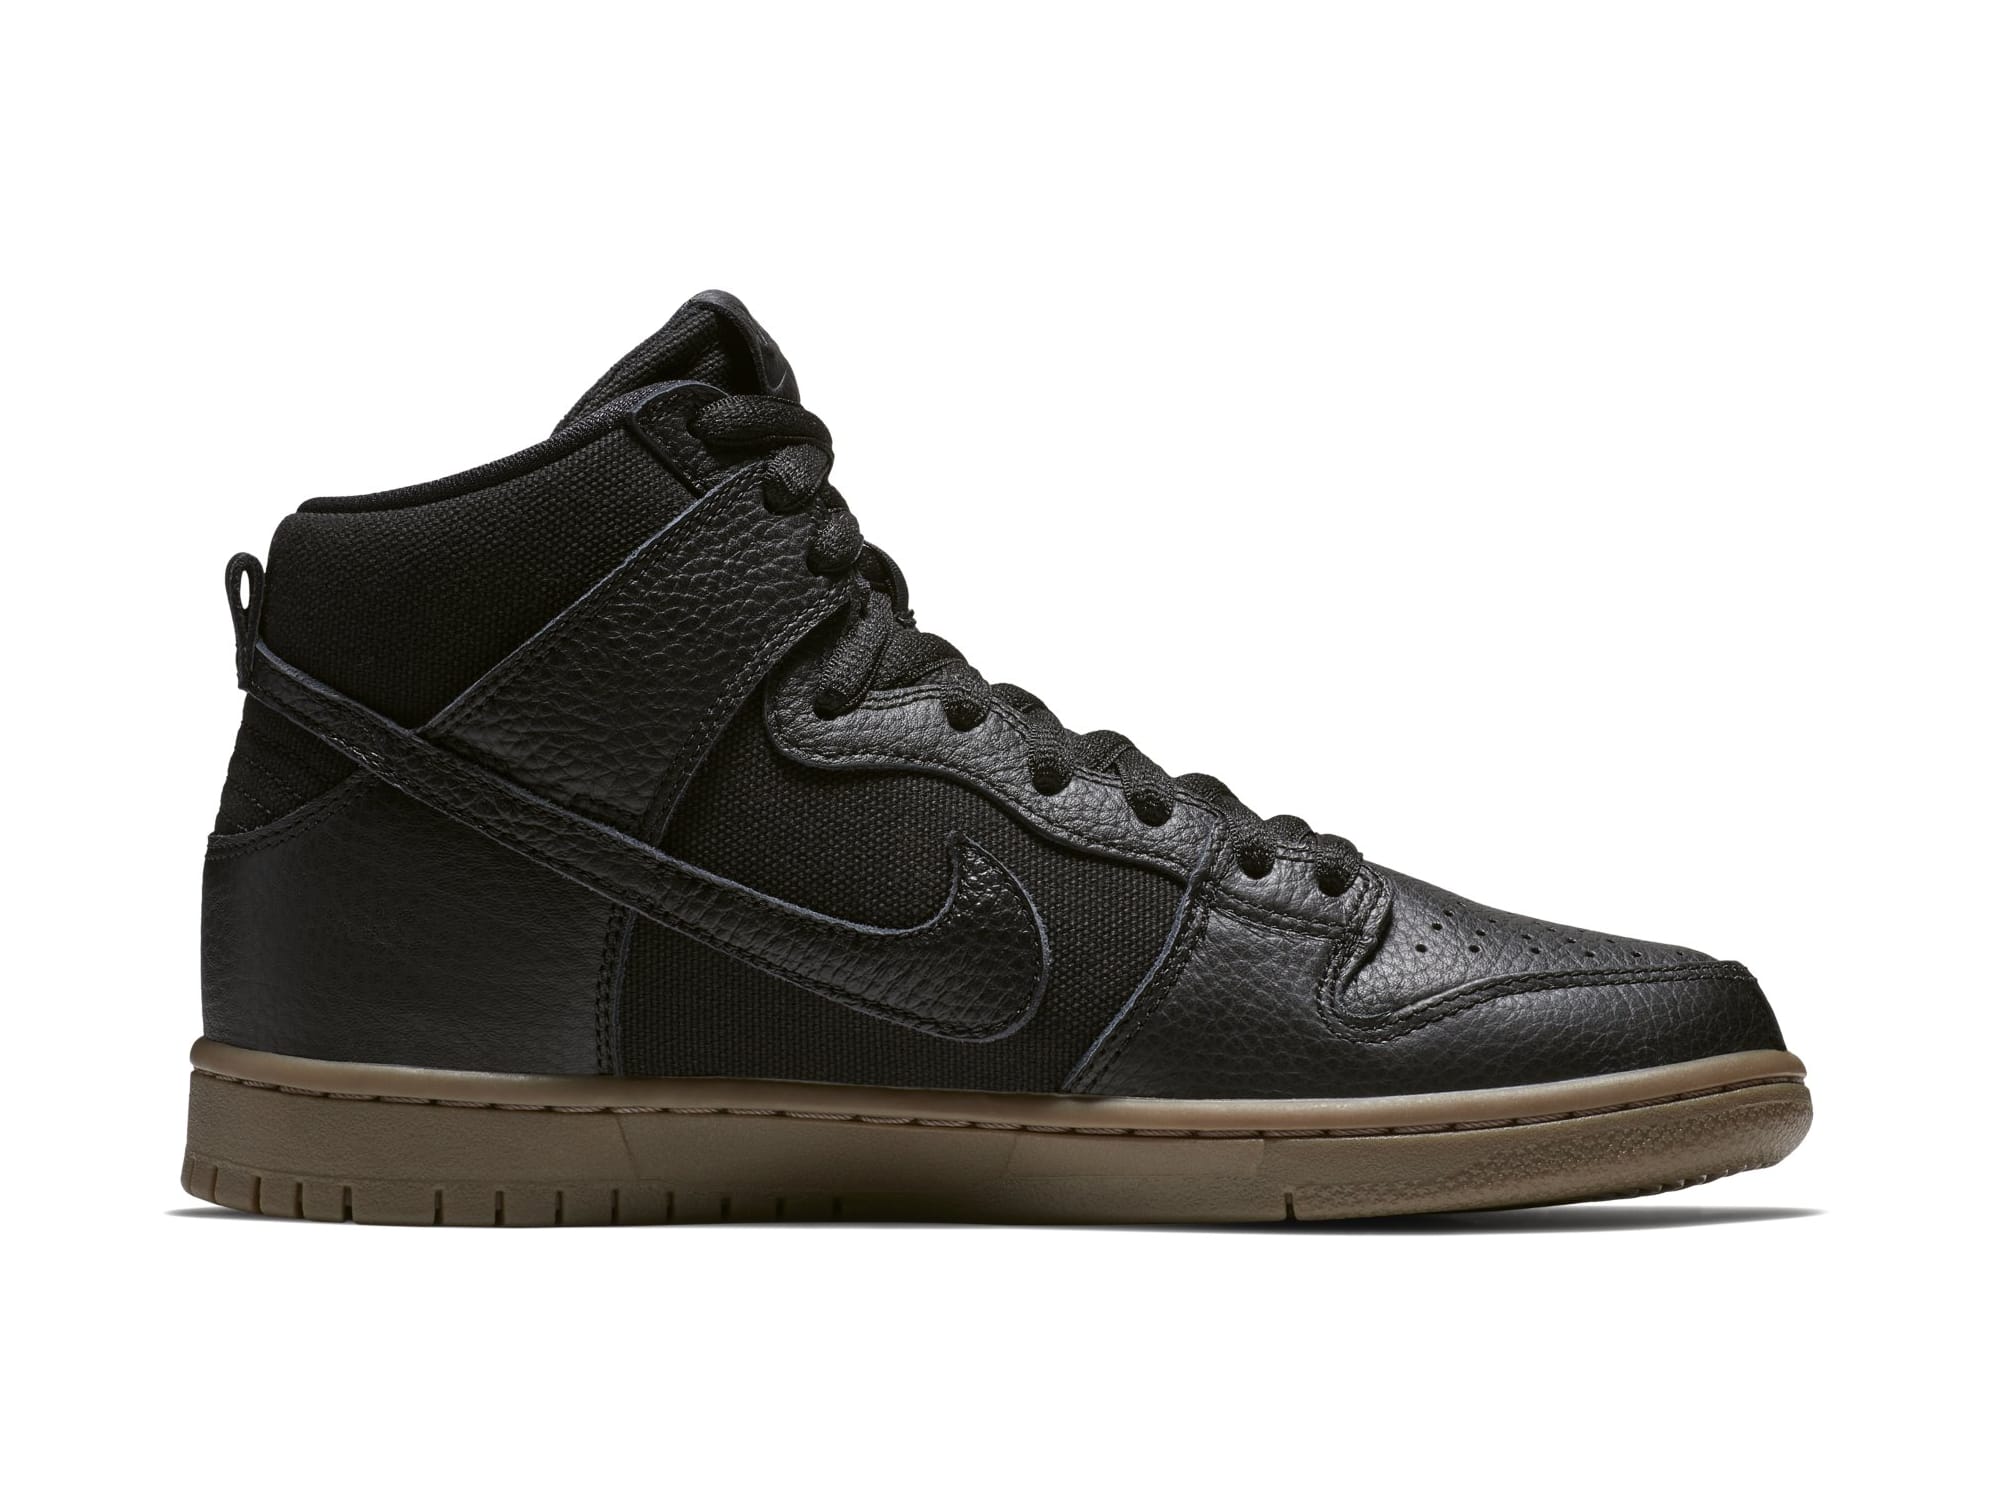 Nike SB Dunk High Brian Anderson AH9613-001 Release Date | Sole 